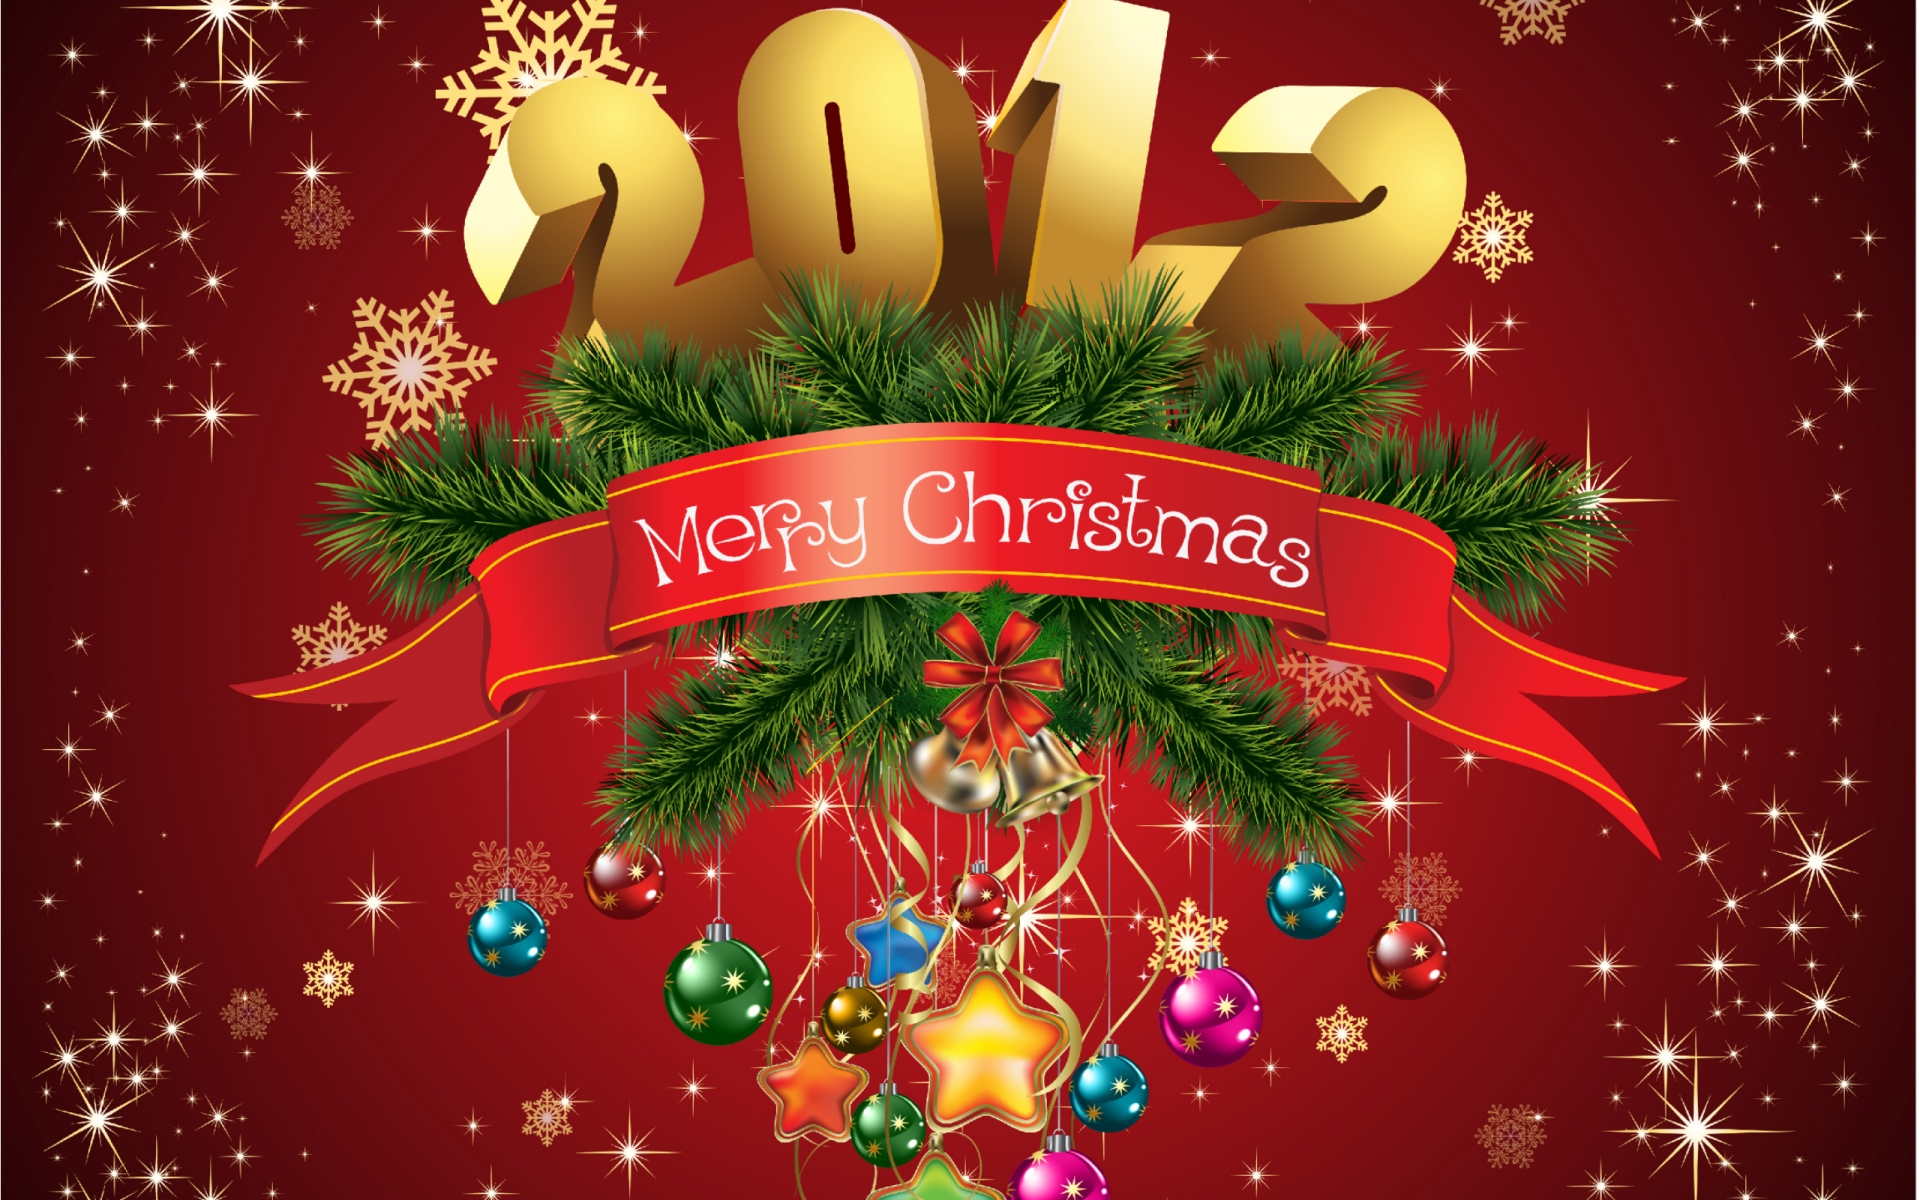 Merry Christmas 2012 for 1920 x 1200 widescreen resolution